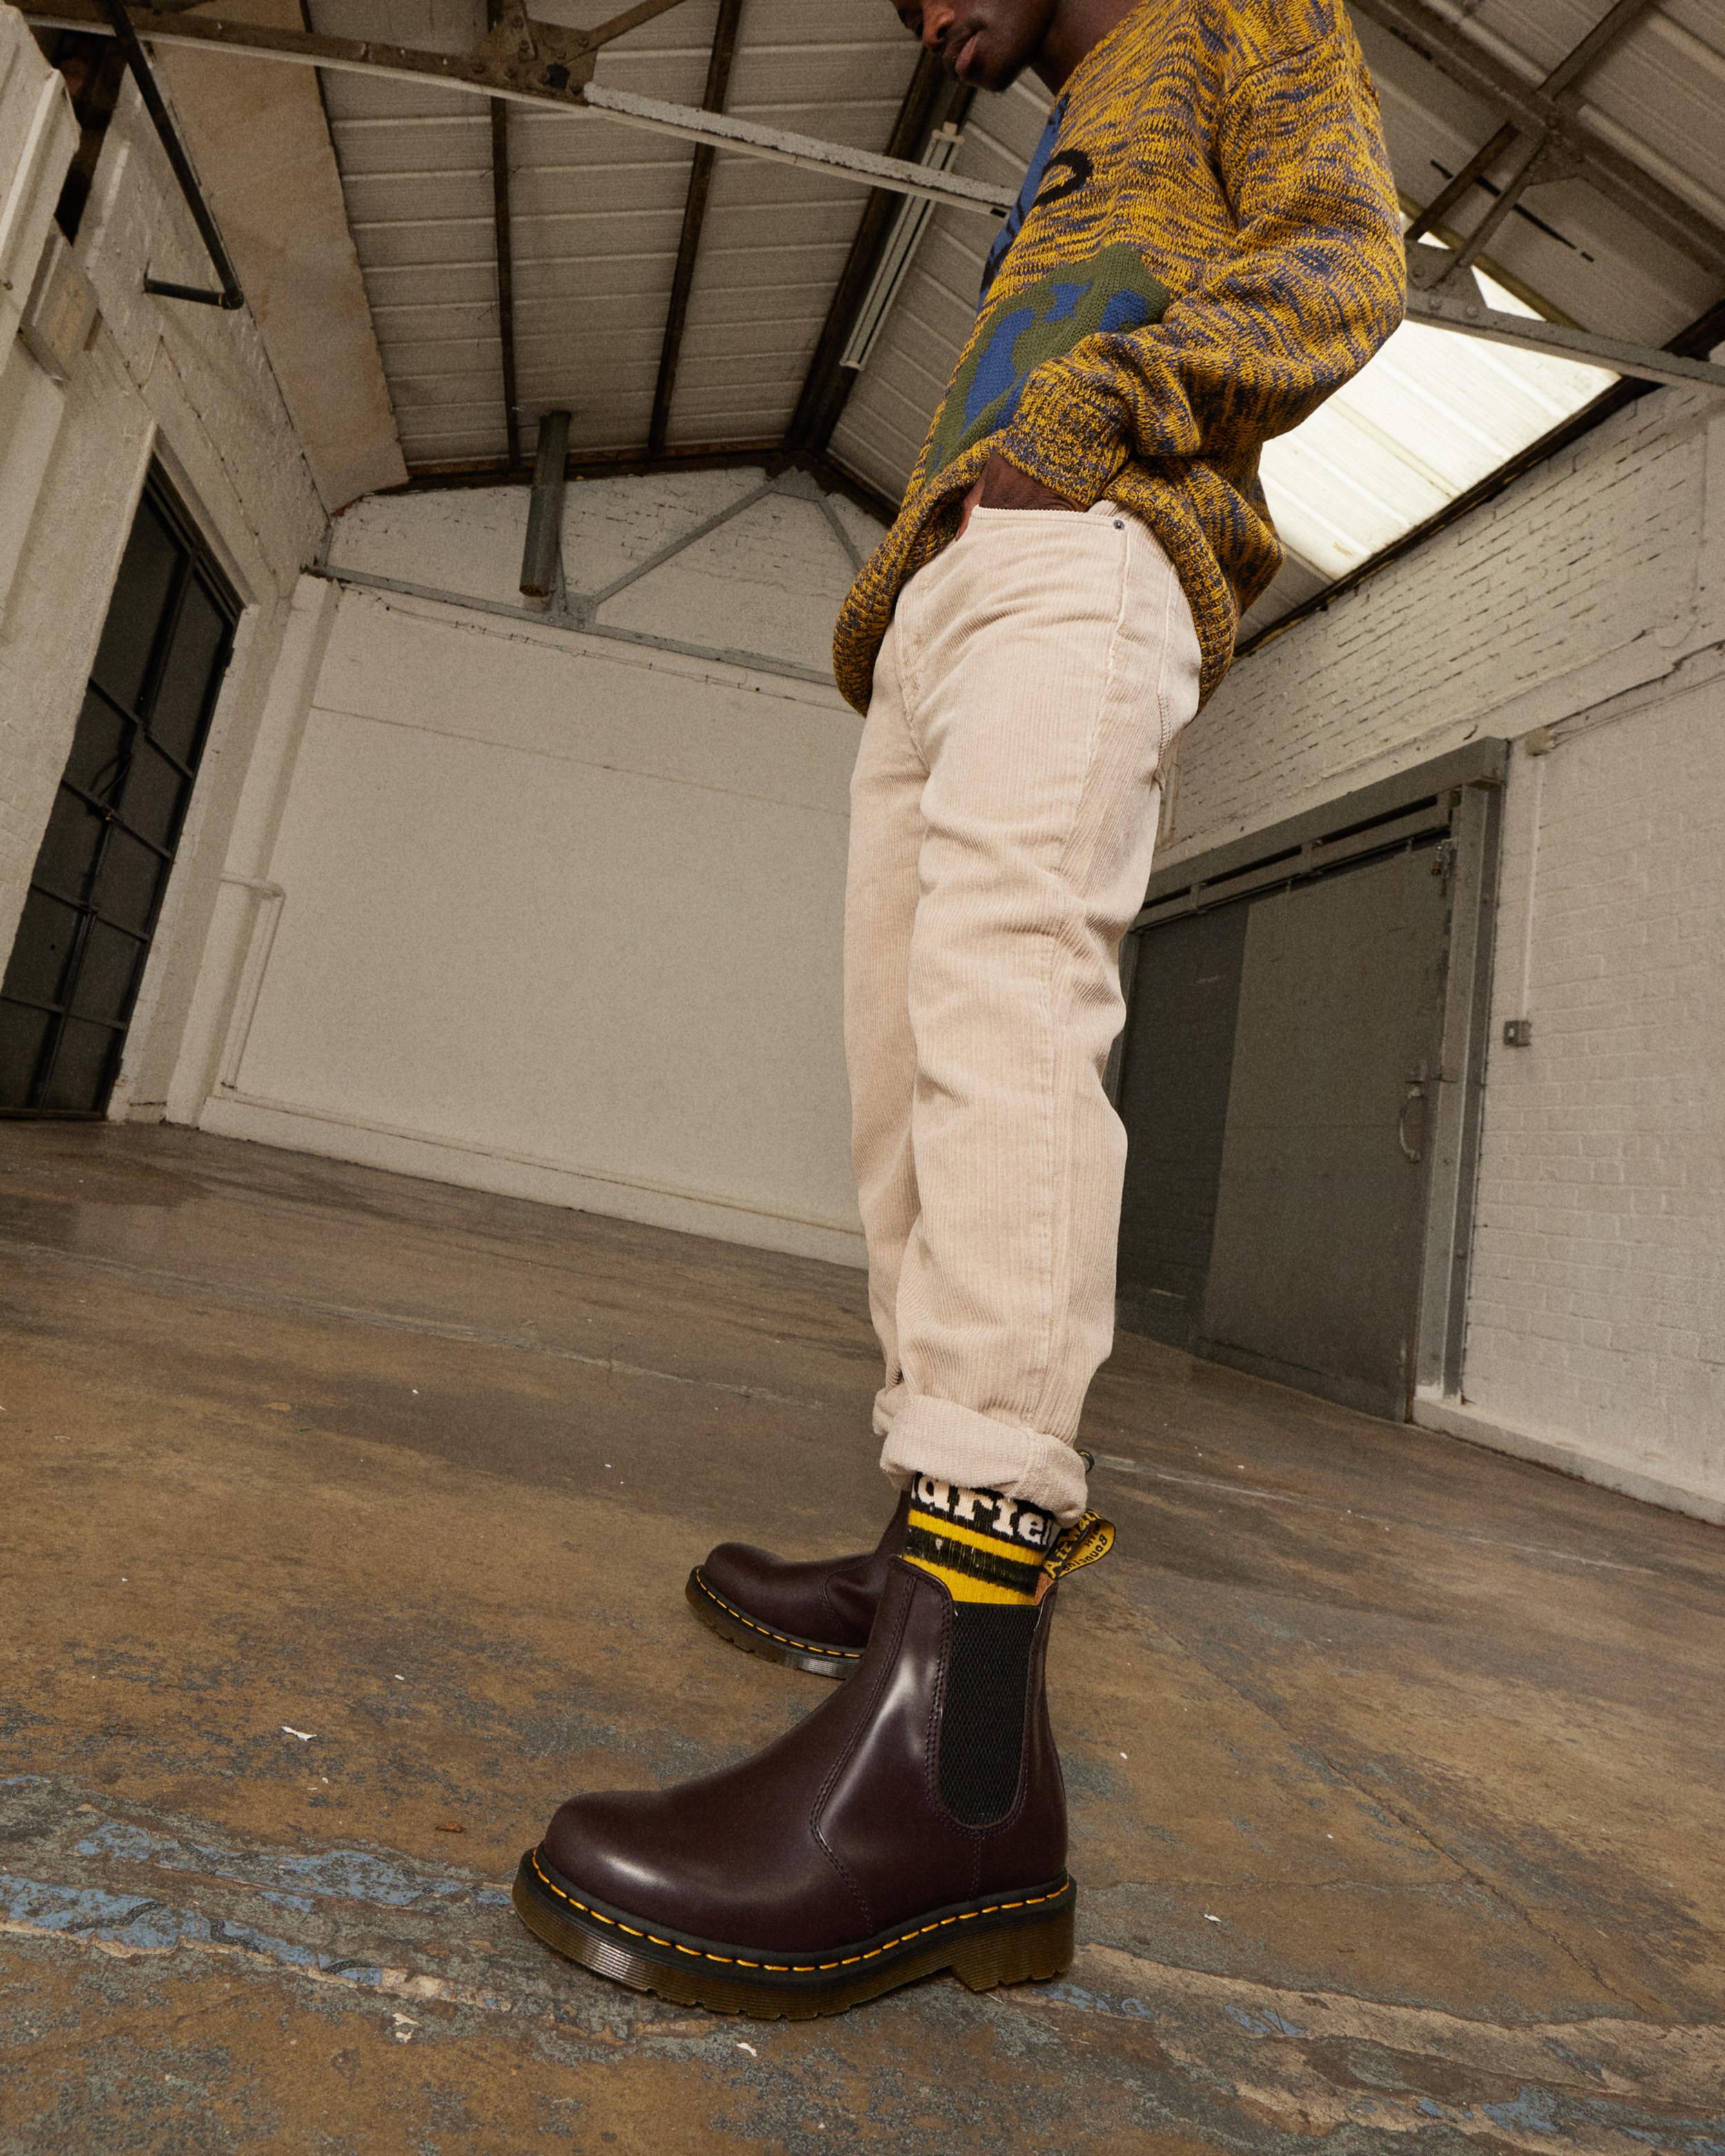 2976 Yellow Stitch Smooth Leather Chelsea Boots in Black | Dr. Martens